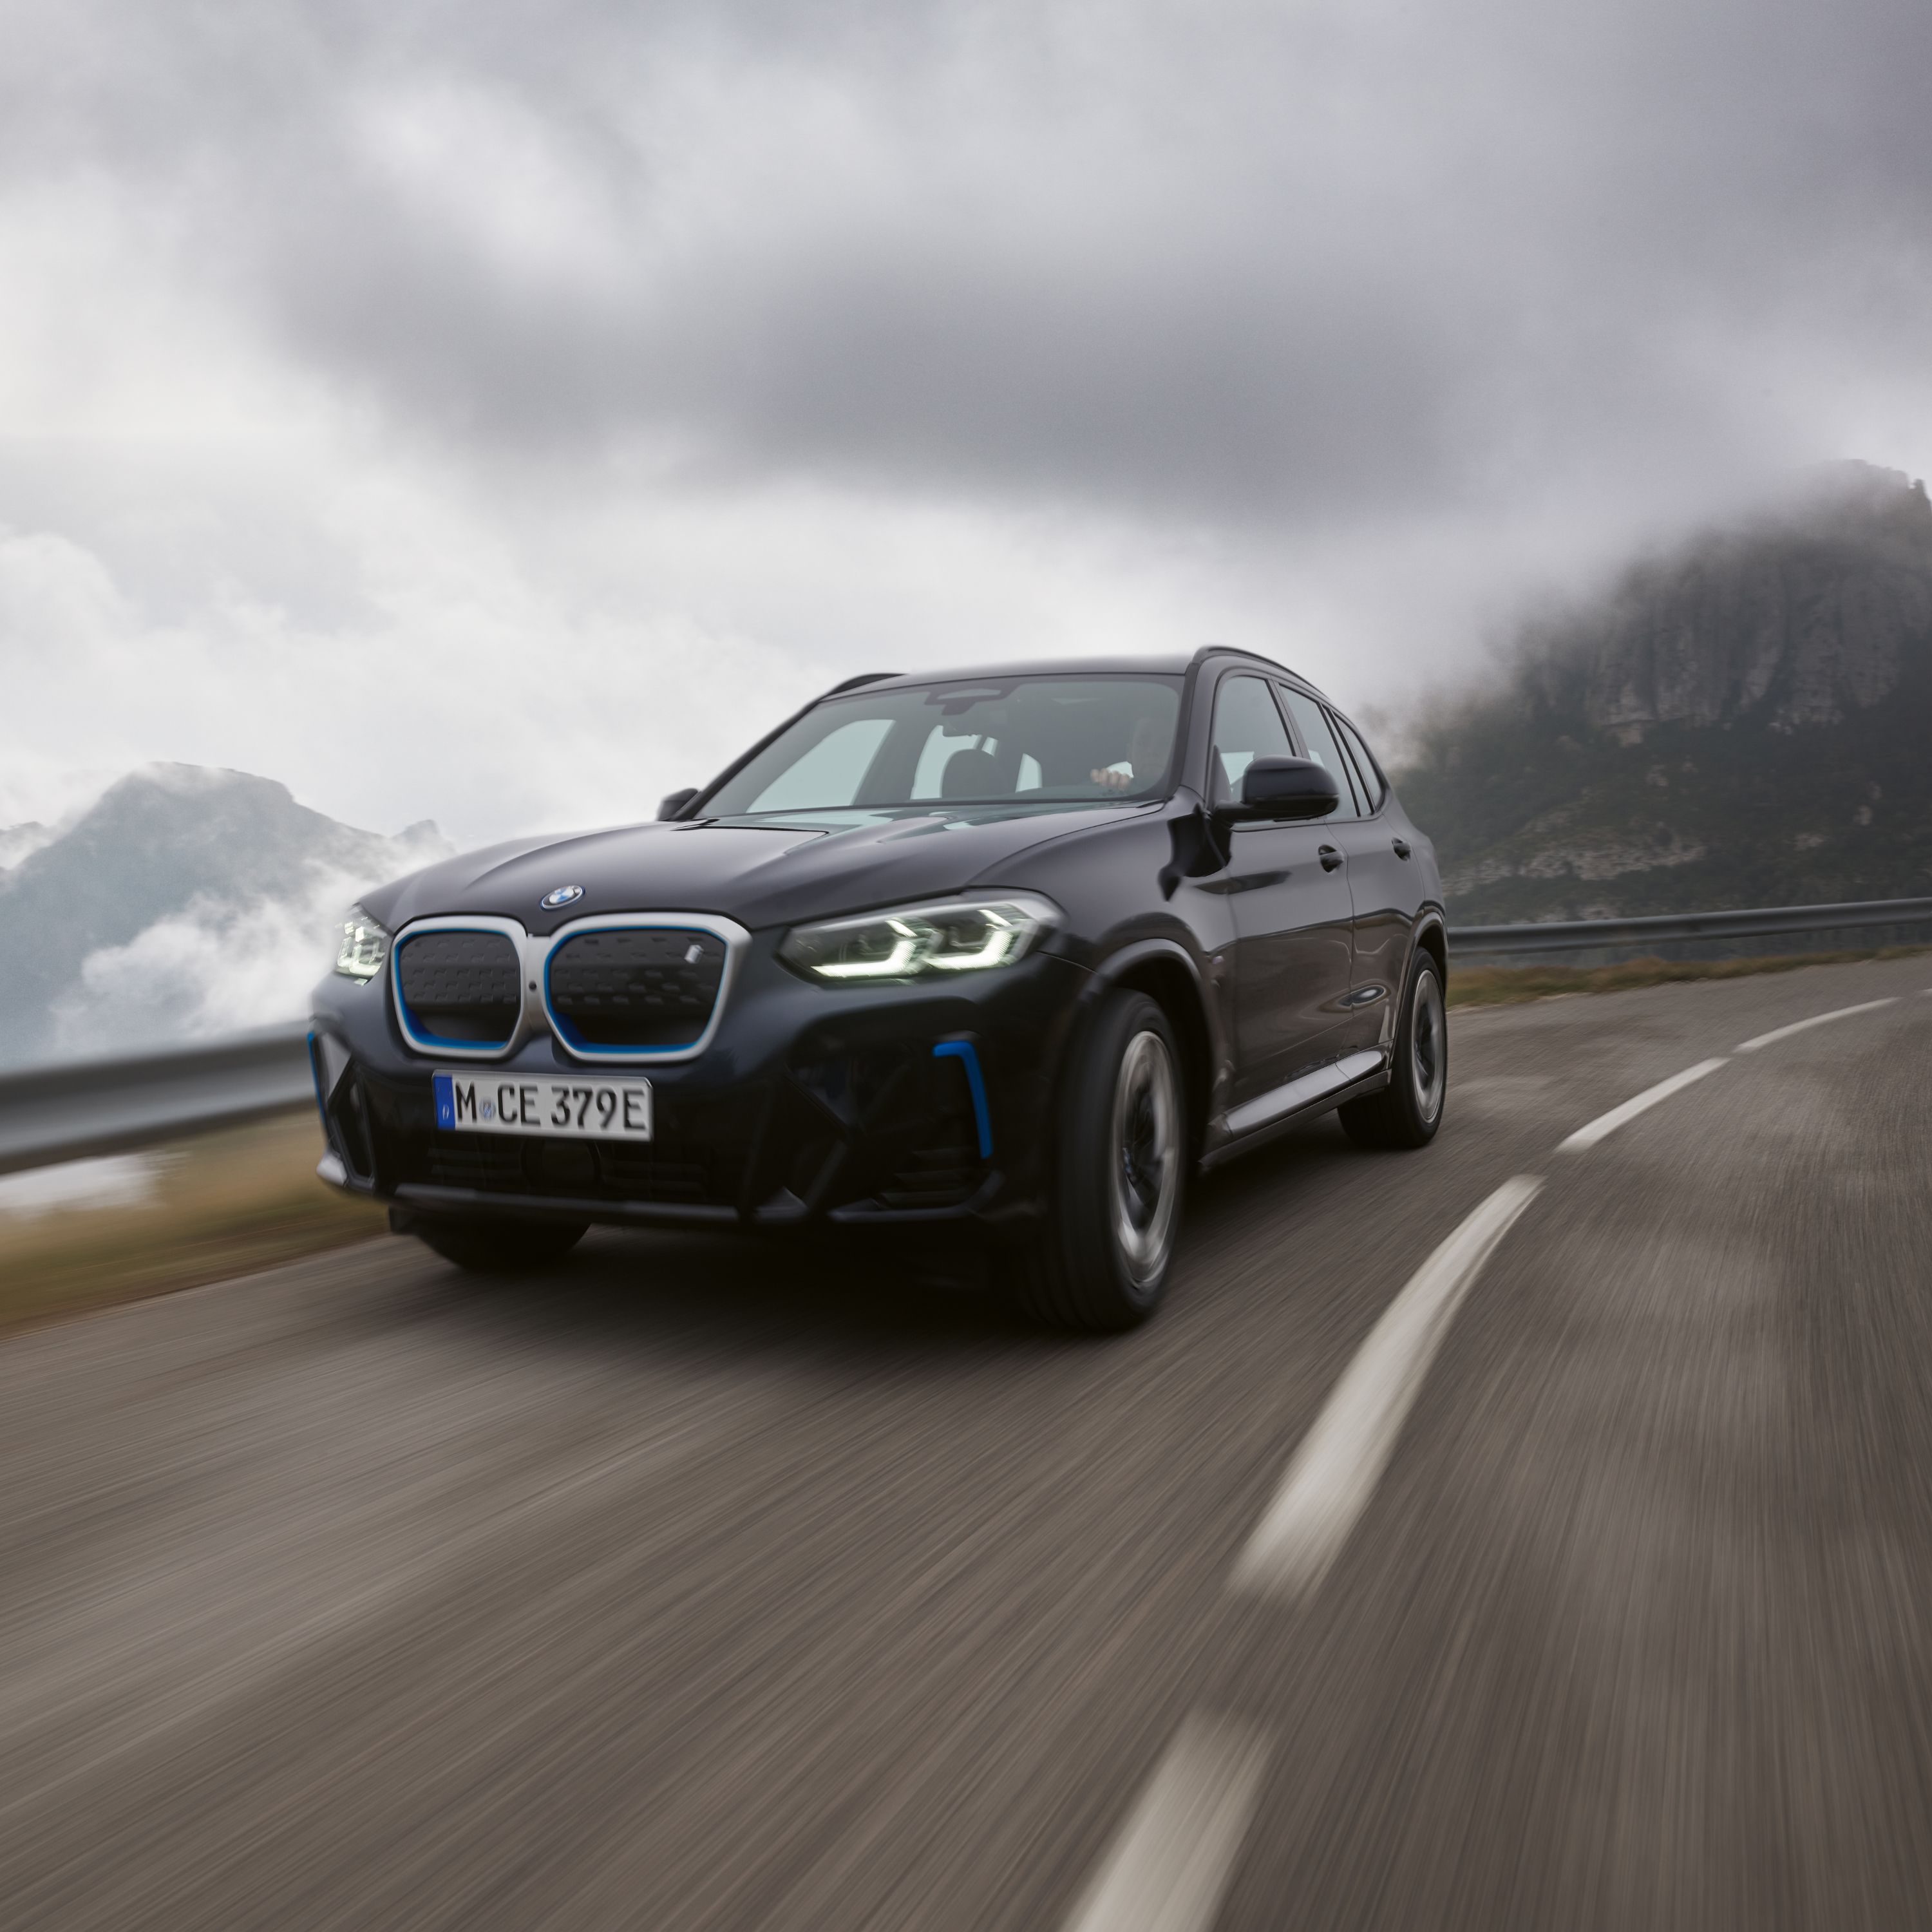 BMW iX3 G08 SUV surrounded by storm clouds on a mountain pass